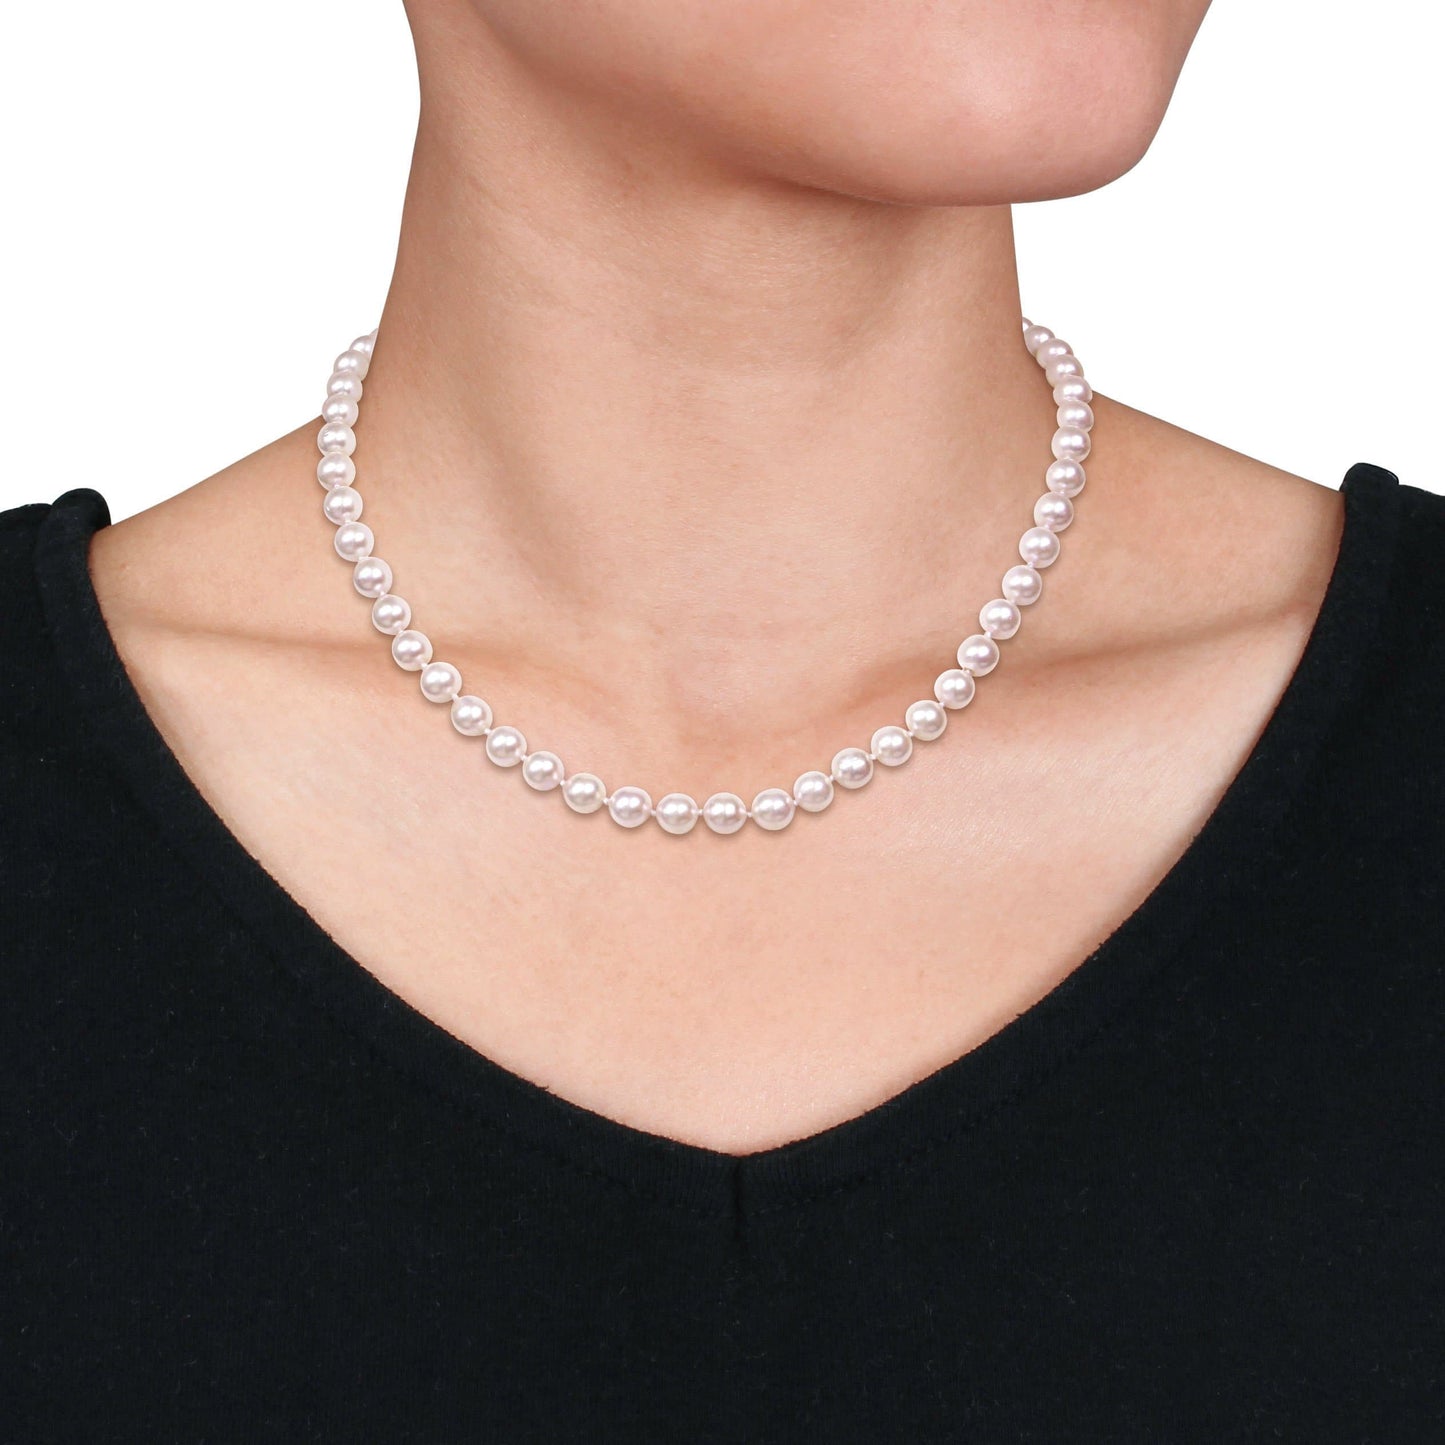 18 7-7.5mm Japanese Akoya Cultured Pearl Necklace